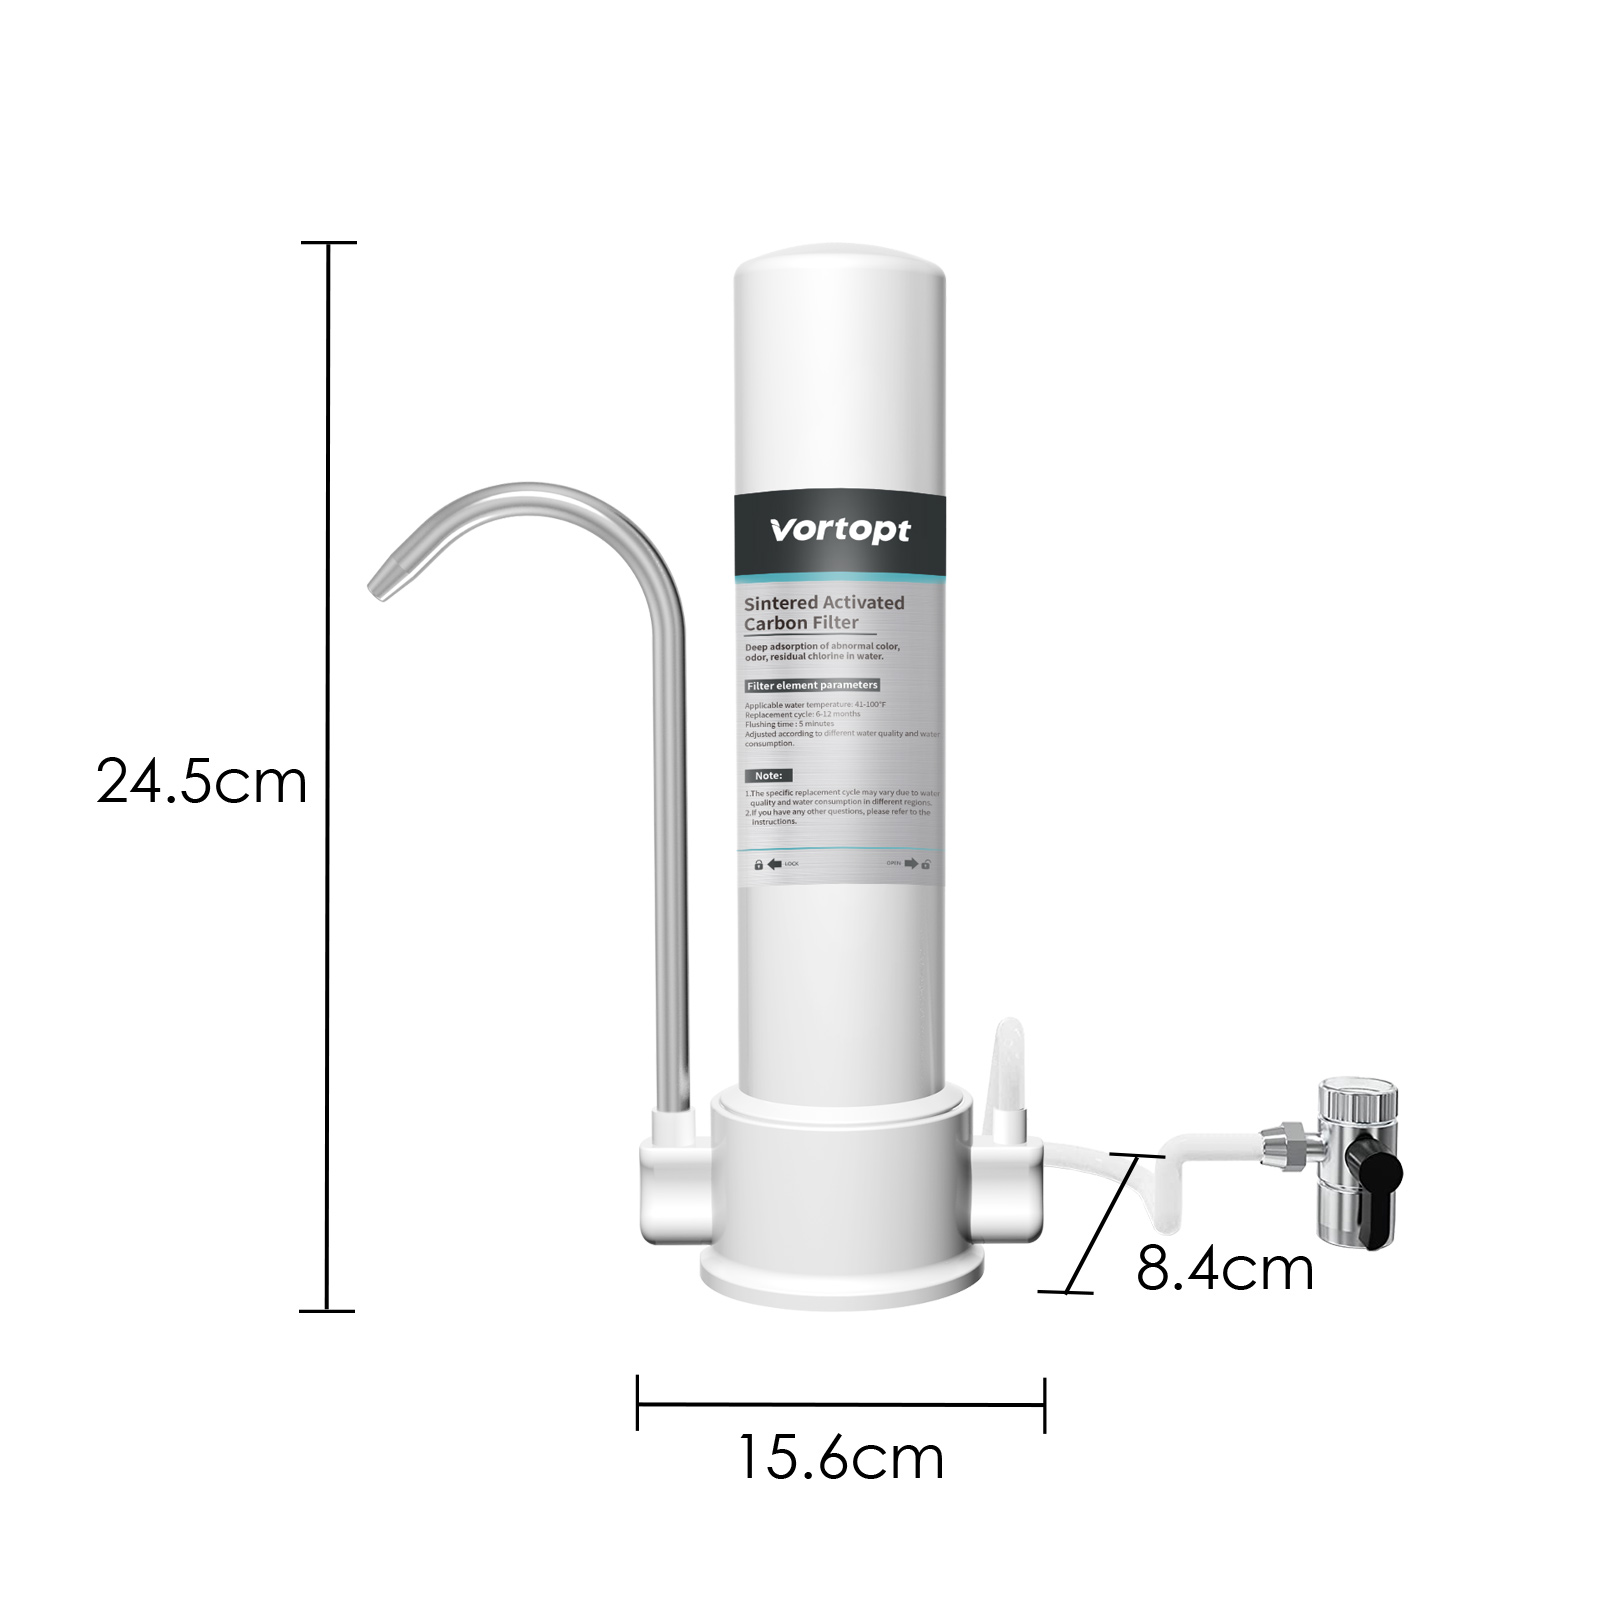 F8 Countertop Water Filtration System - Faucet Water Filter for Sink - Water Purifier for Kitchen, Vortopt 